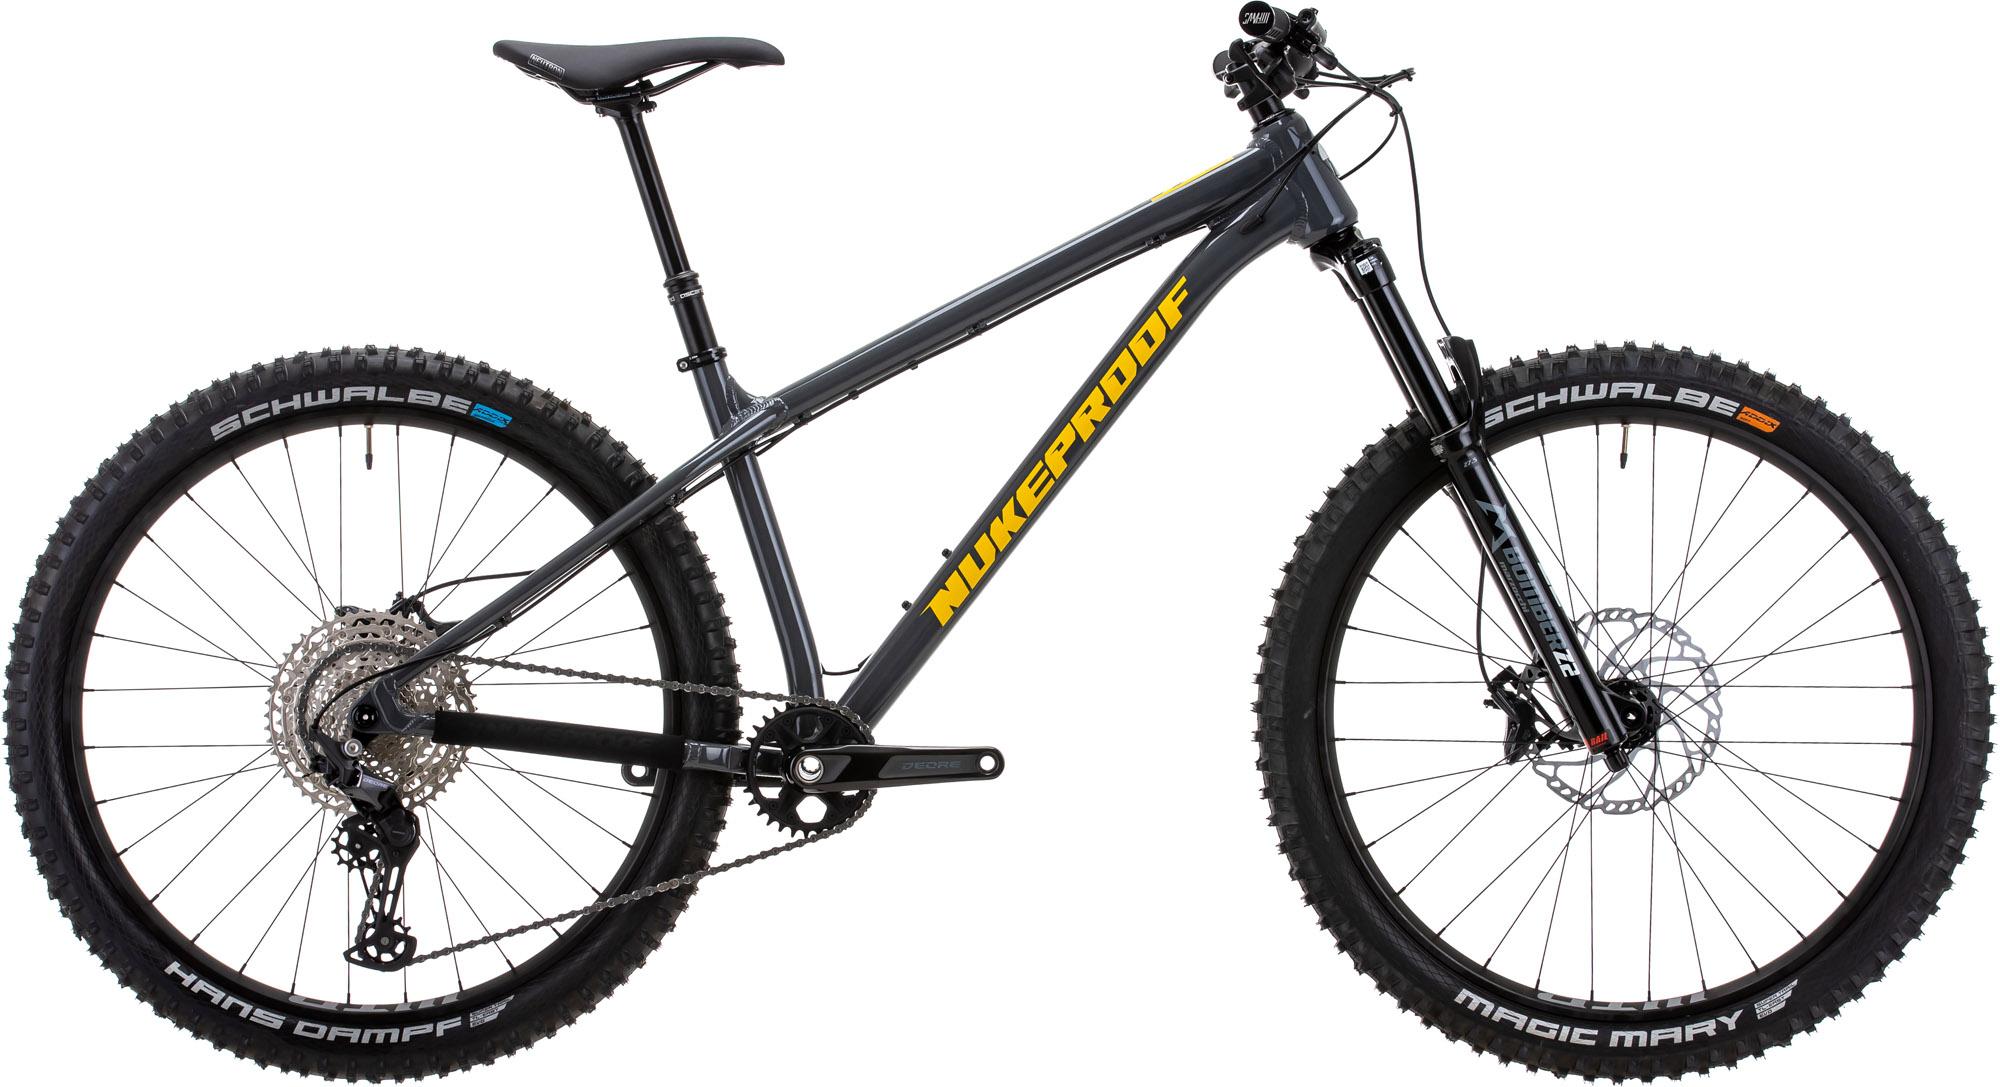 Nukeproof Scout 275 Comp Alloy Mountain Bike (deore12) - Bullet Grey